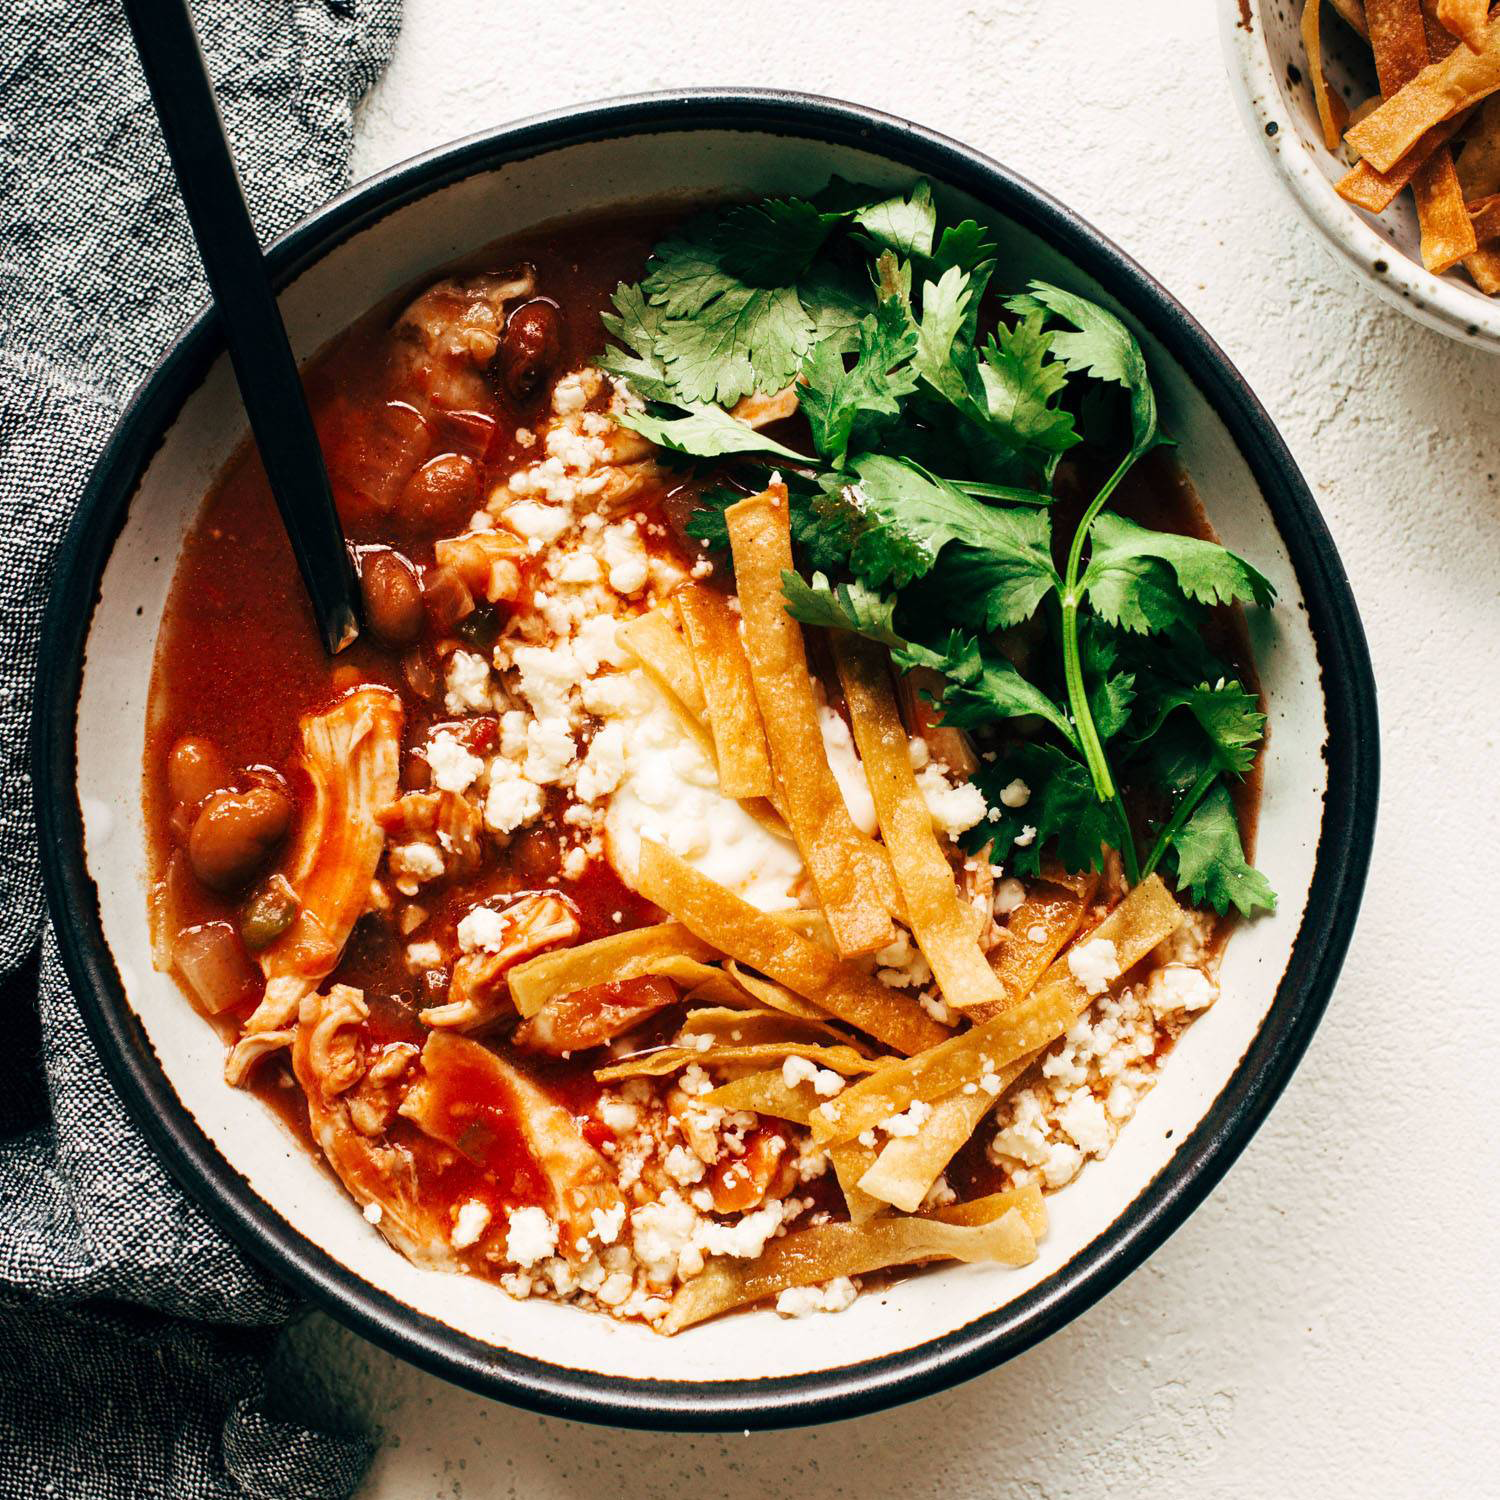 Chicken tortilla soup in a bowl with cilantro on top.